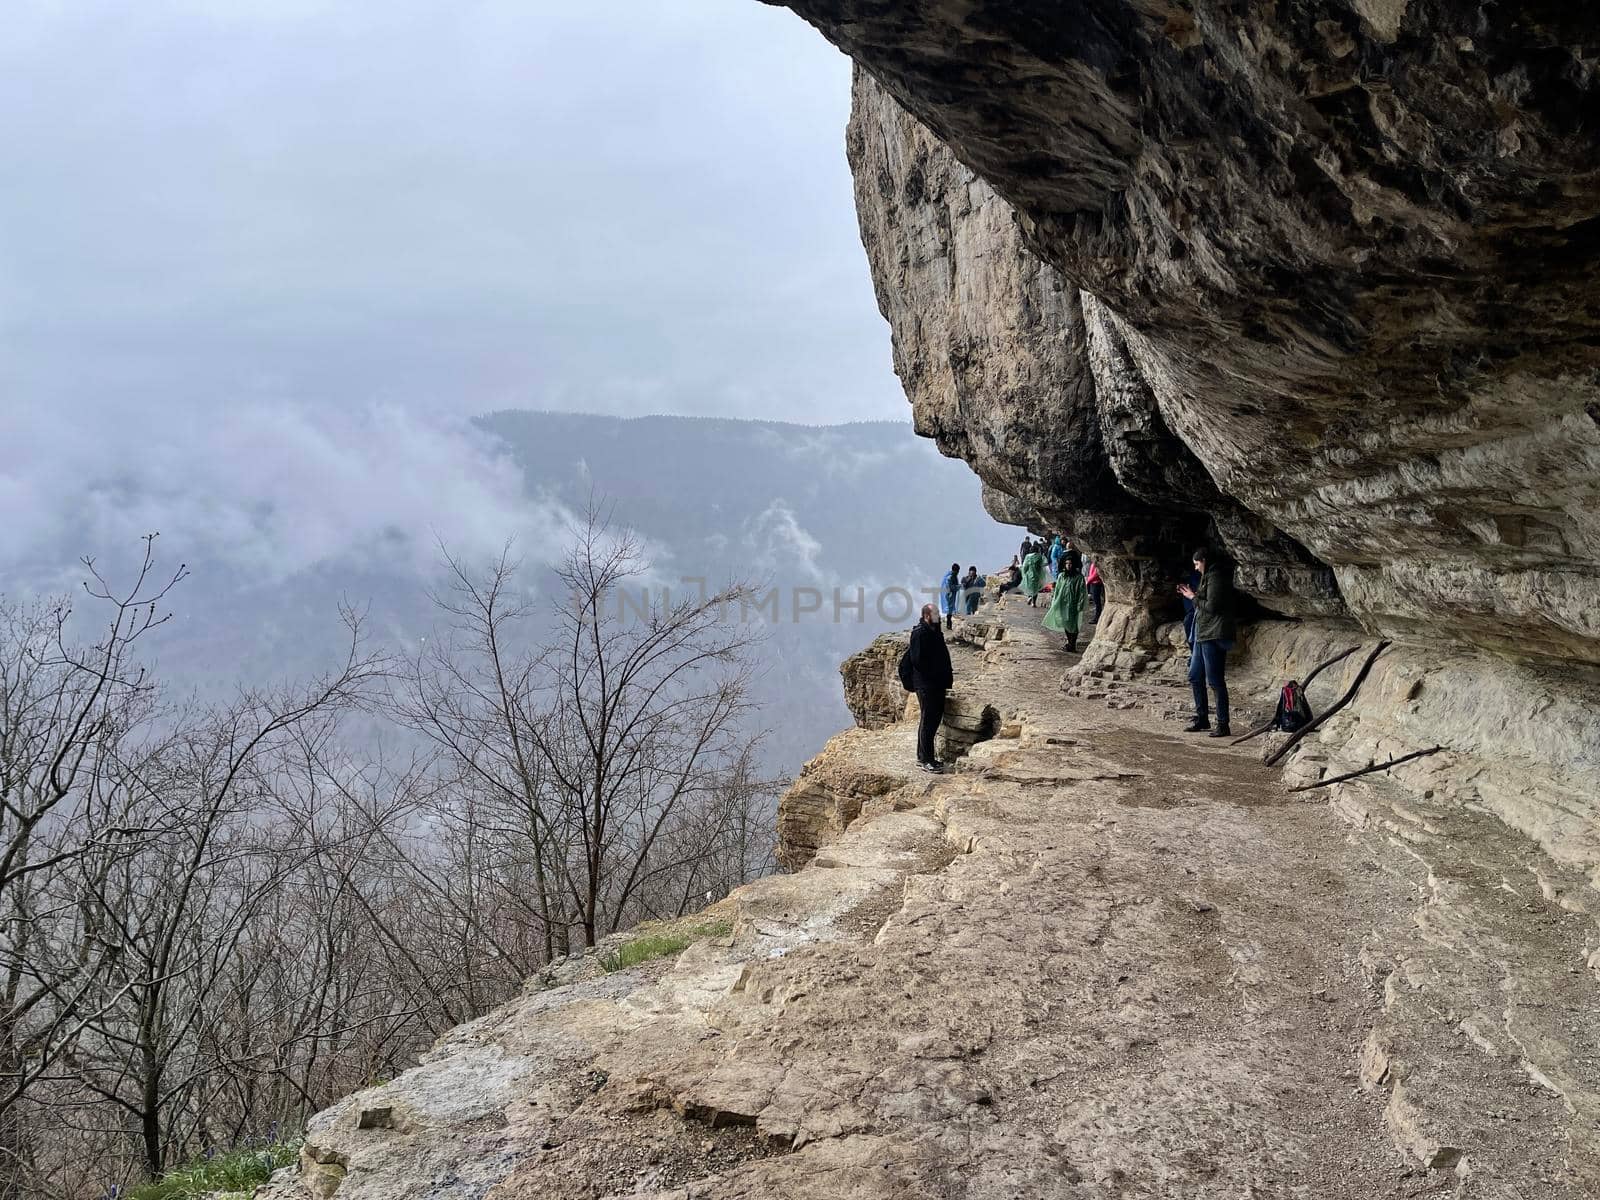 Guamka, Russia april 17, 2021: Tourists on huge cliff with spectacular view of nature. Group of people on high rock in foggy and cloudy weather. by epidemiks